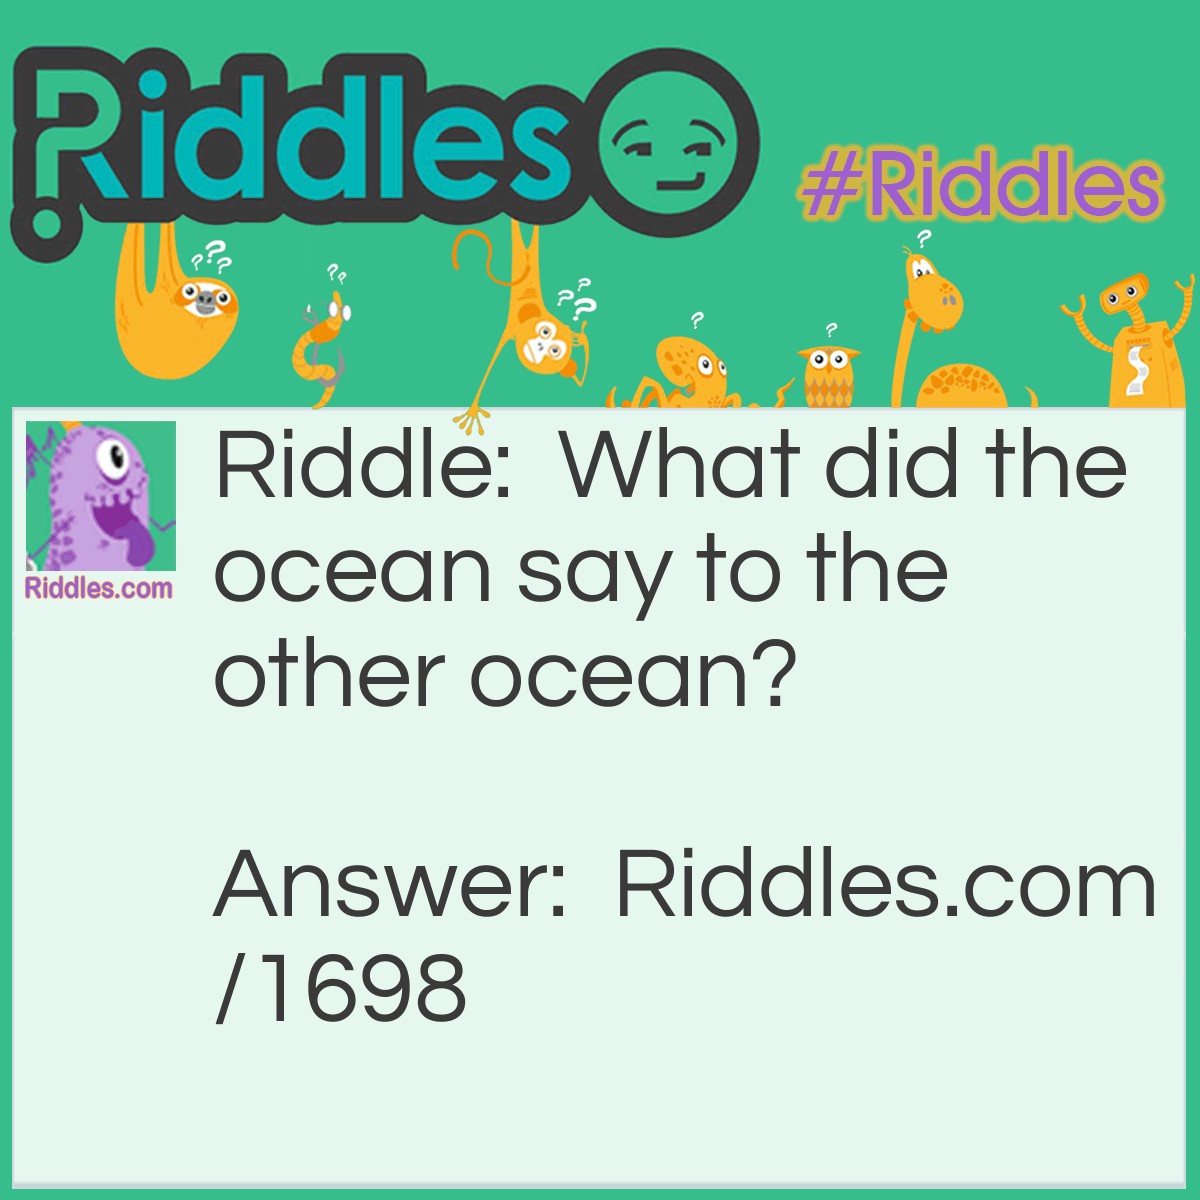 Riddle: What did the ocean say to the other ocean? Answer: Nothing, they just waved.